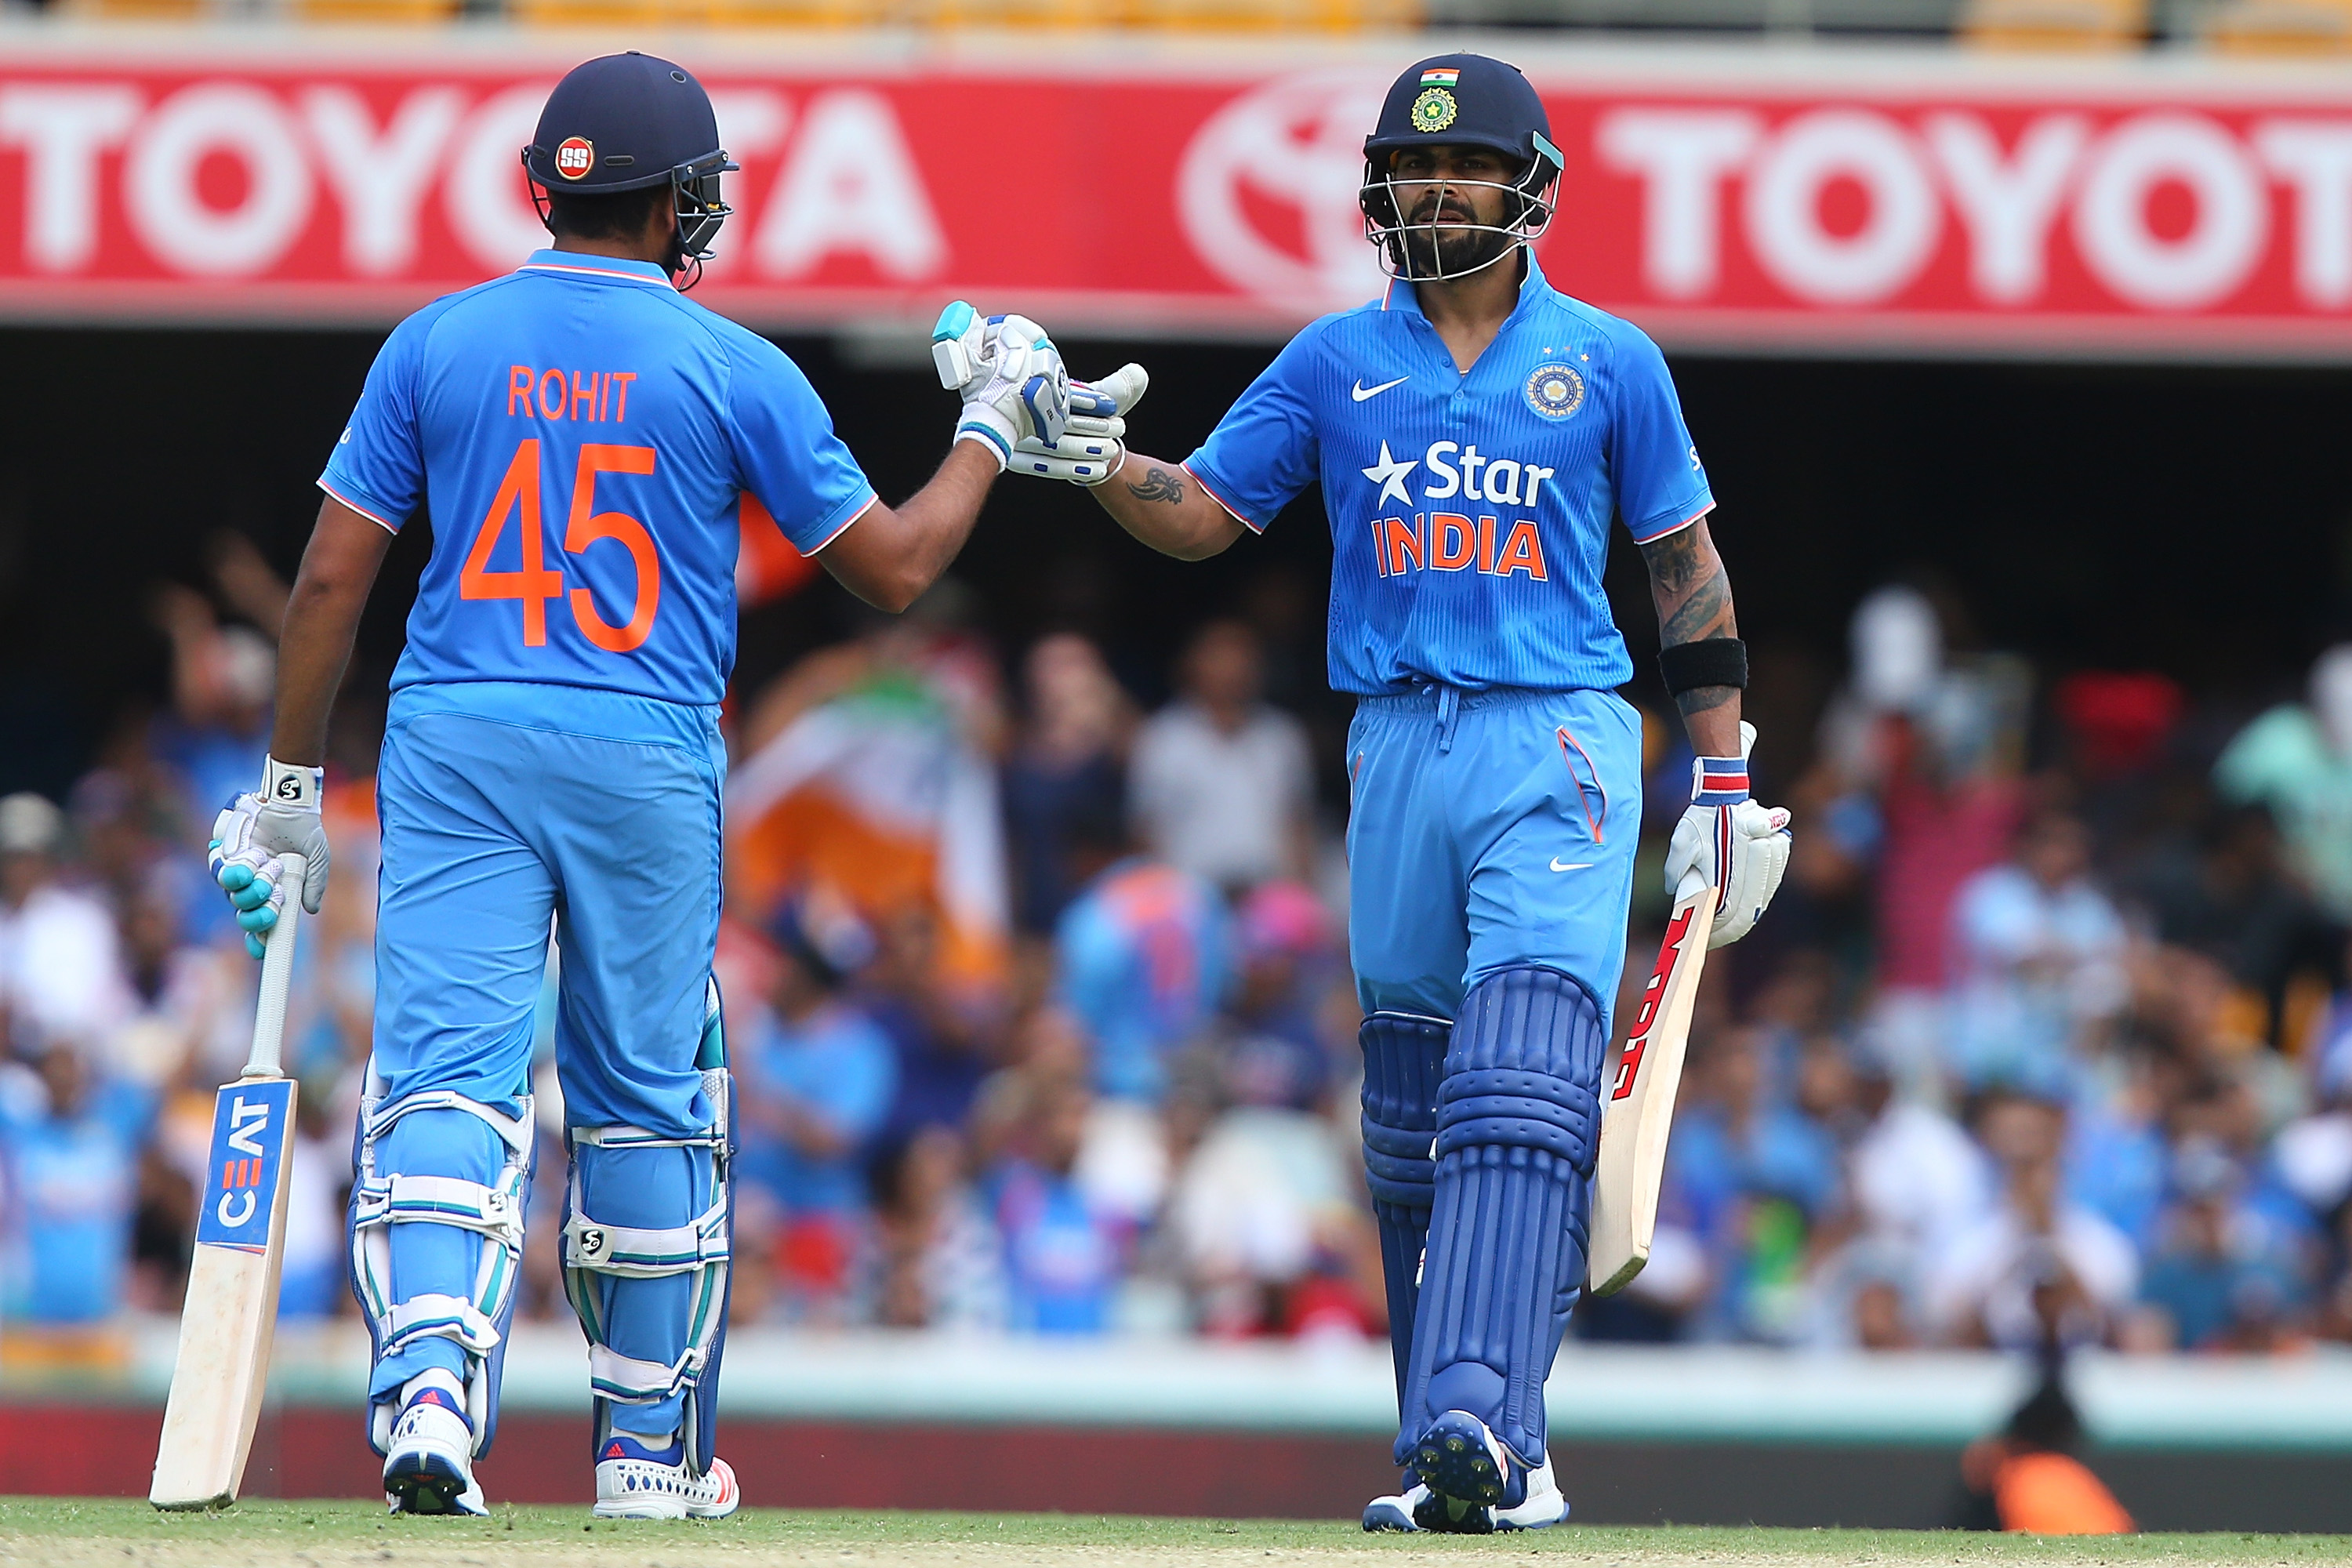 India vs South Africa | Predicted XI for first ODI in Durban